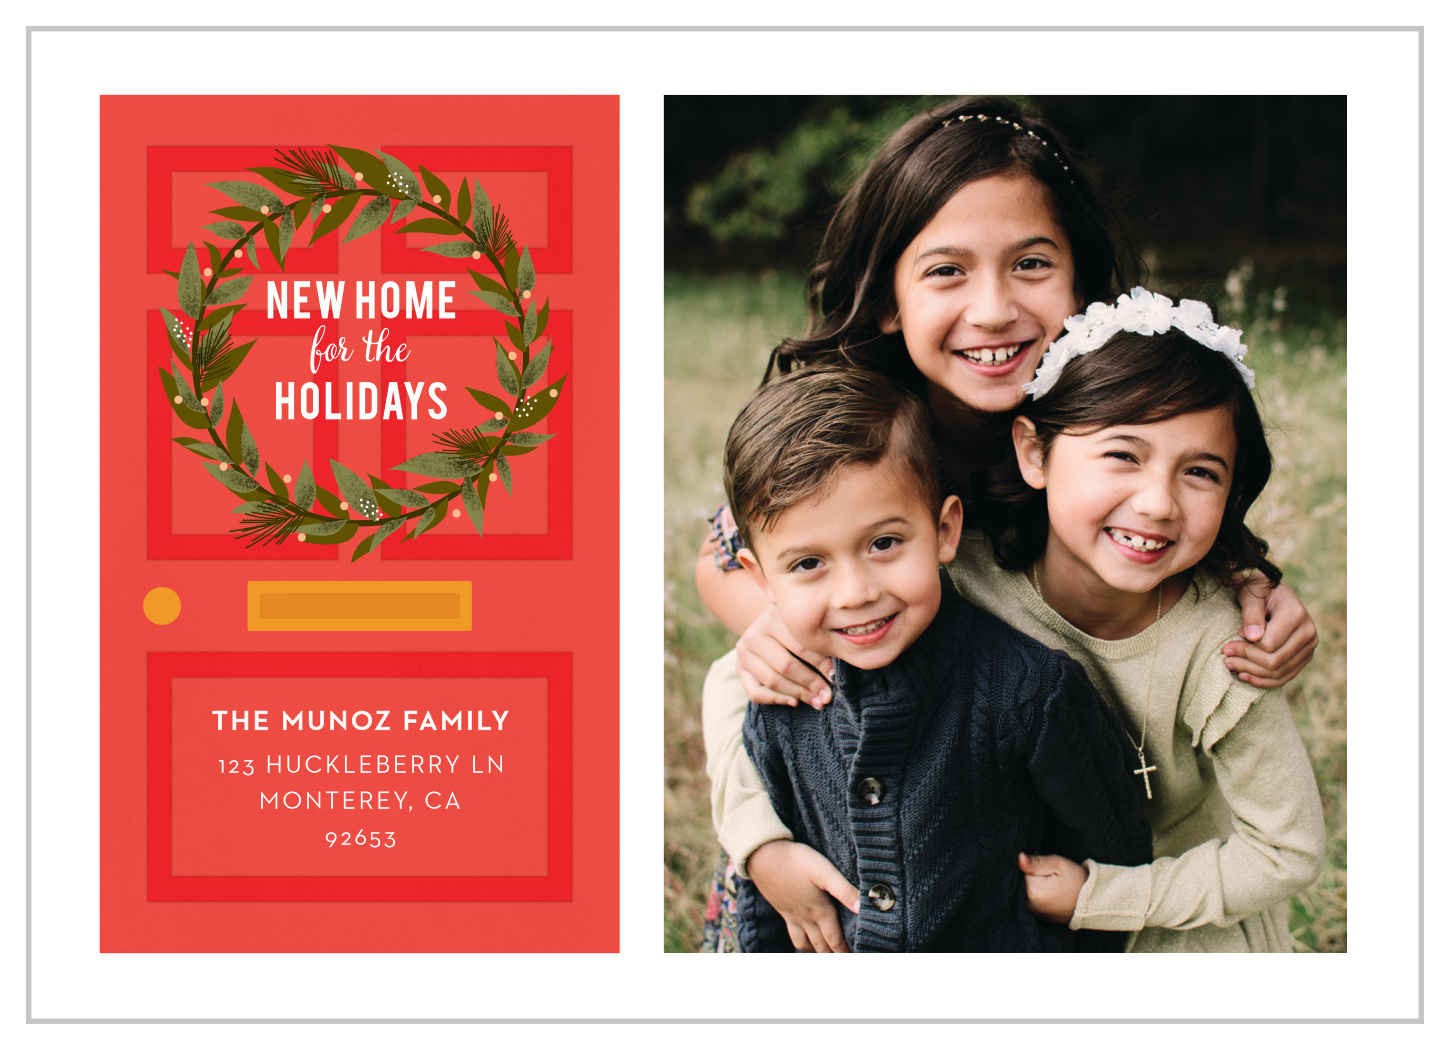 Our New Home Holiday Cards